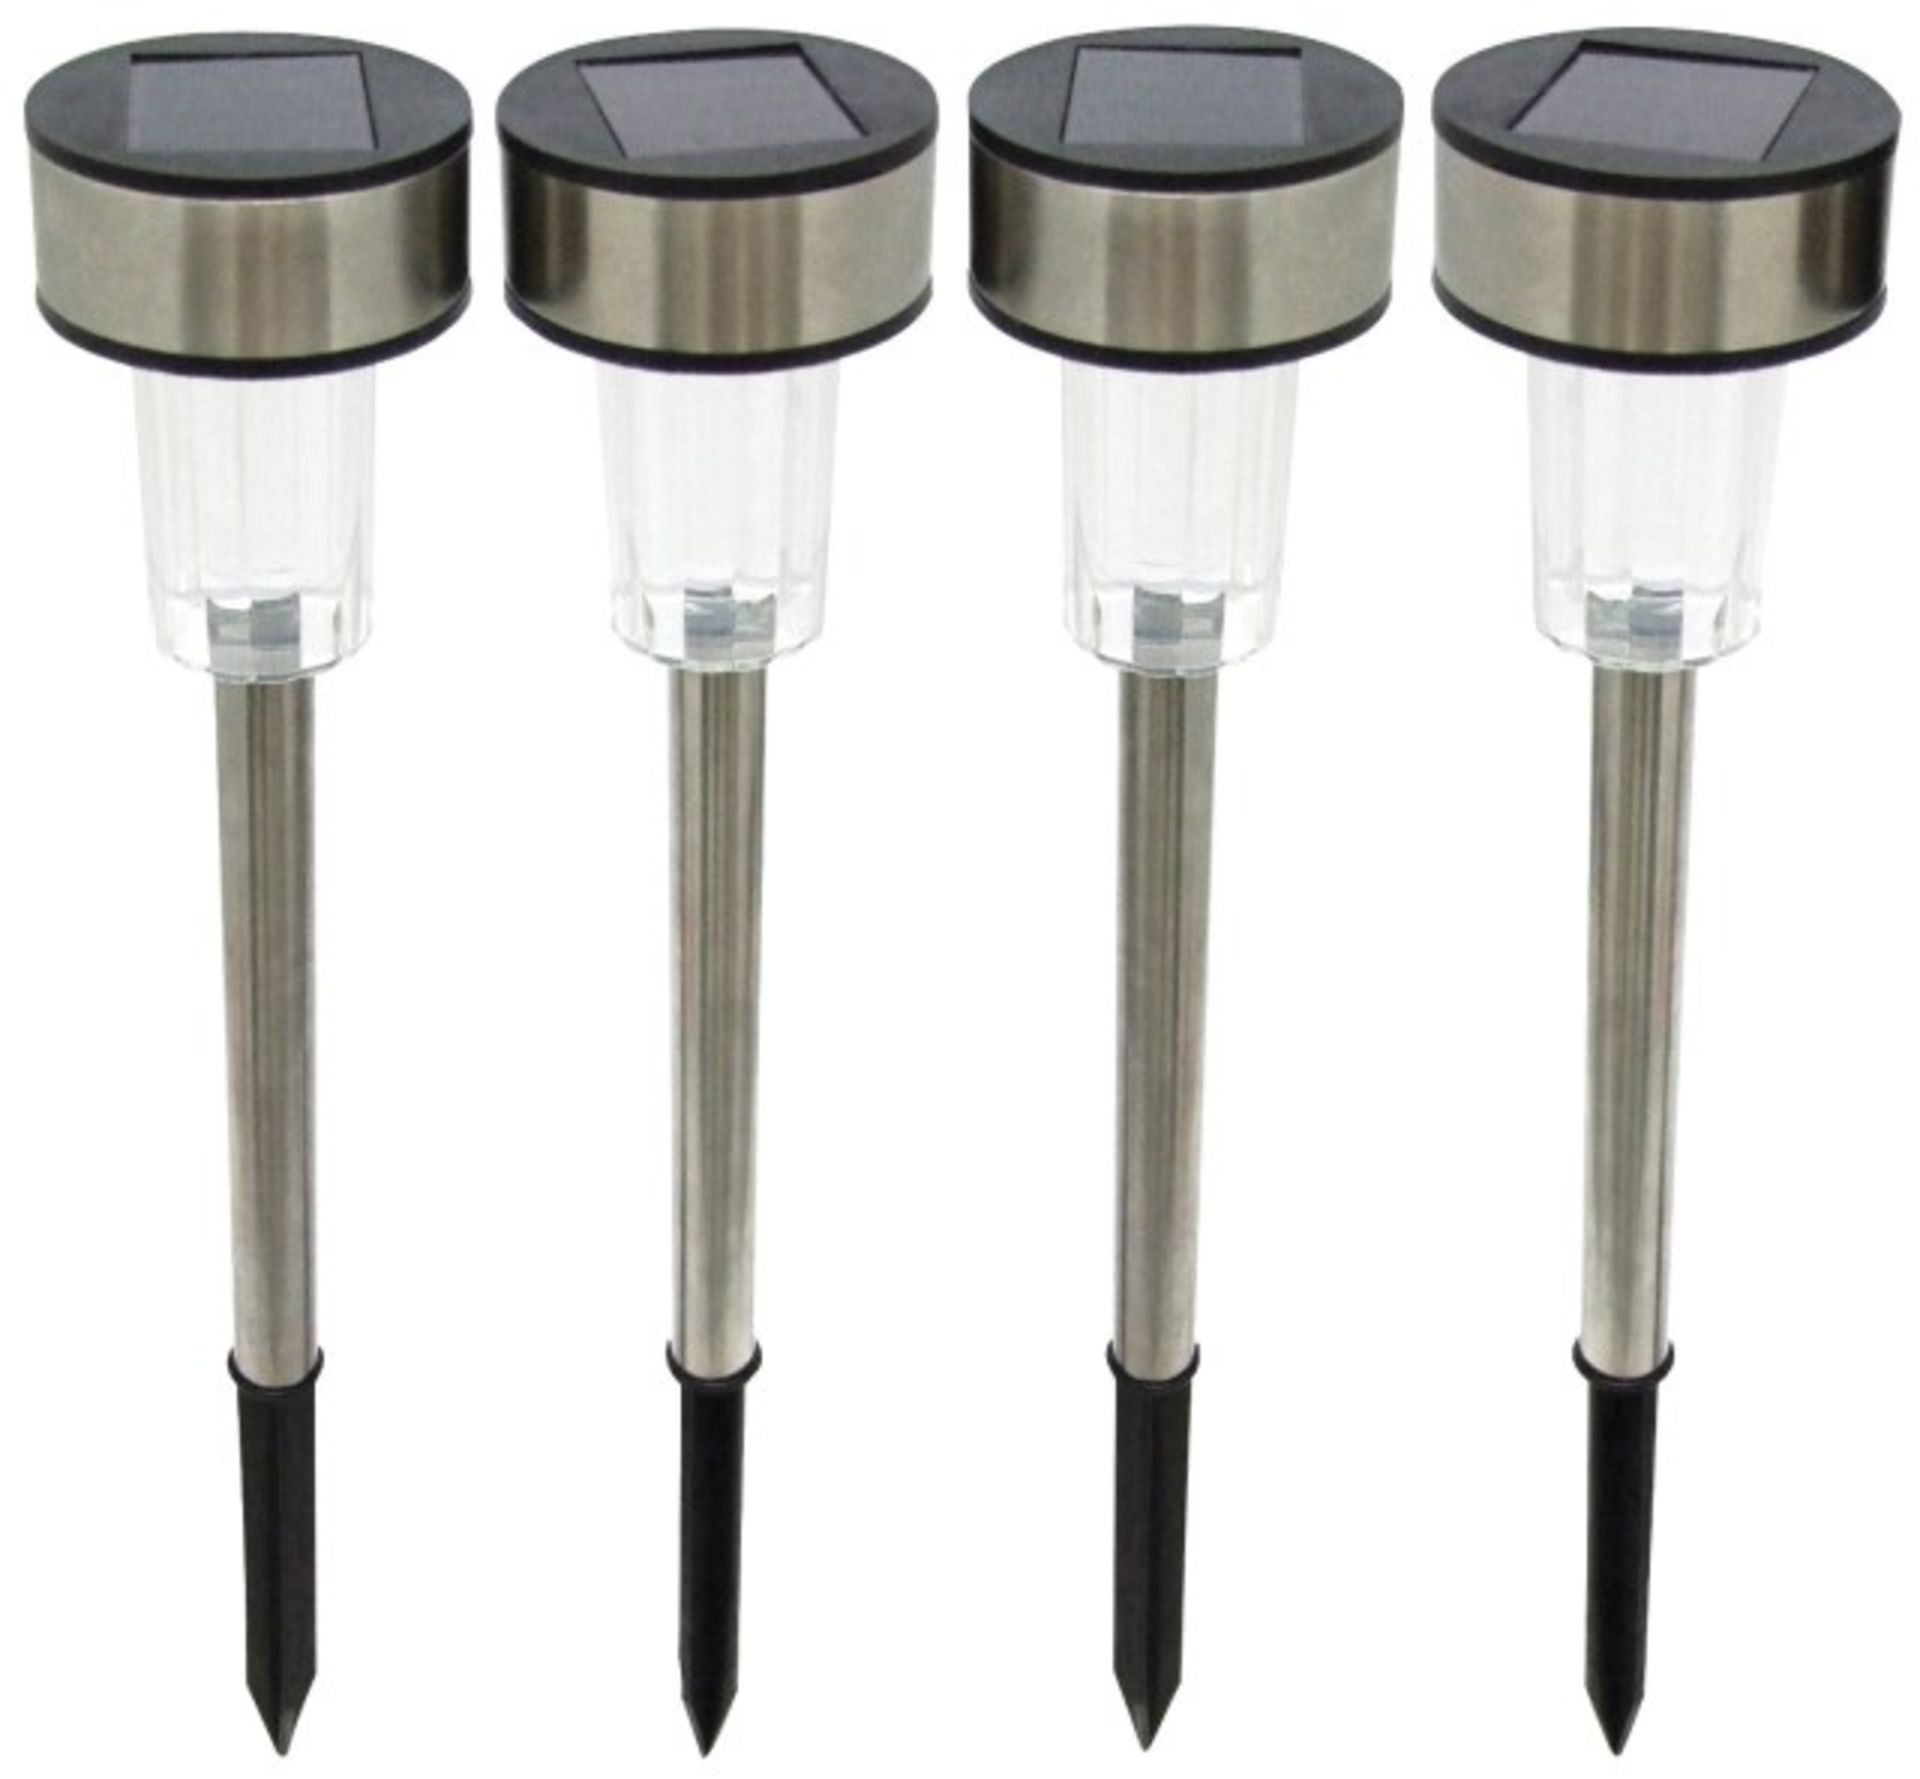 V *TRADE QTY* Brand New Set Of 4 Kempton Stainless Steel Solar Lights X 7 YOUR BID PRICE TO BE